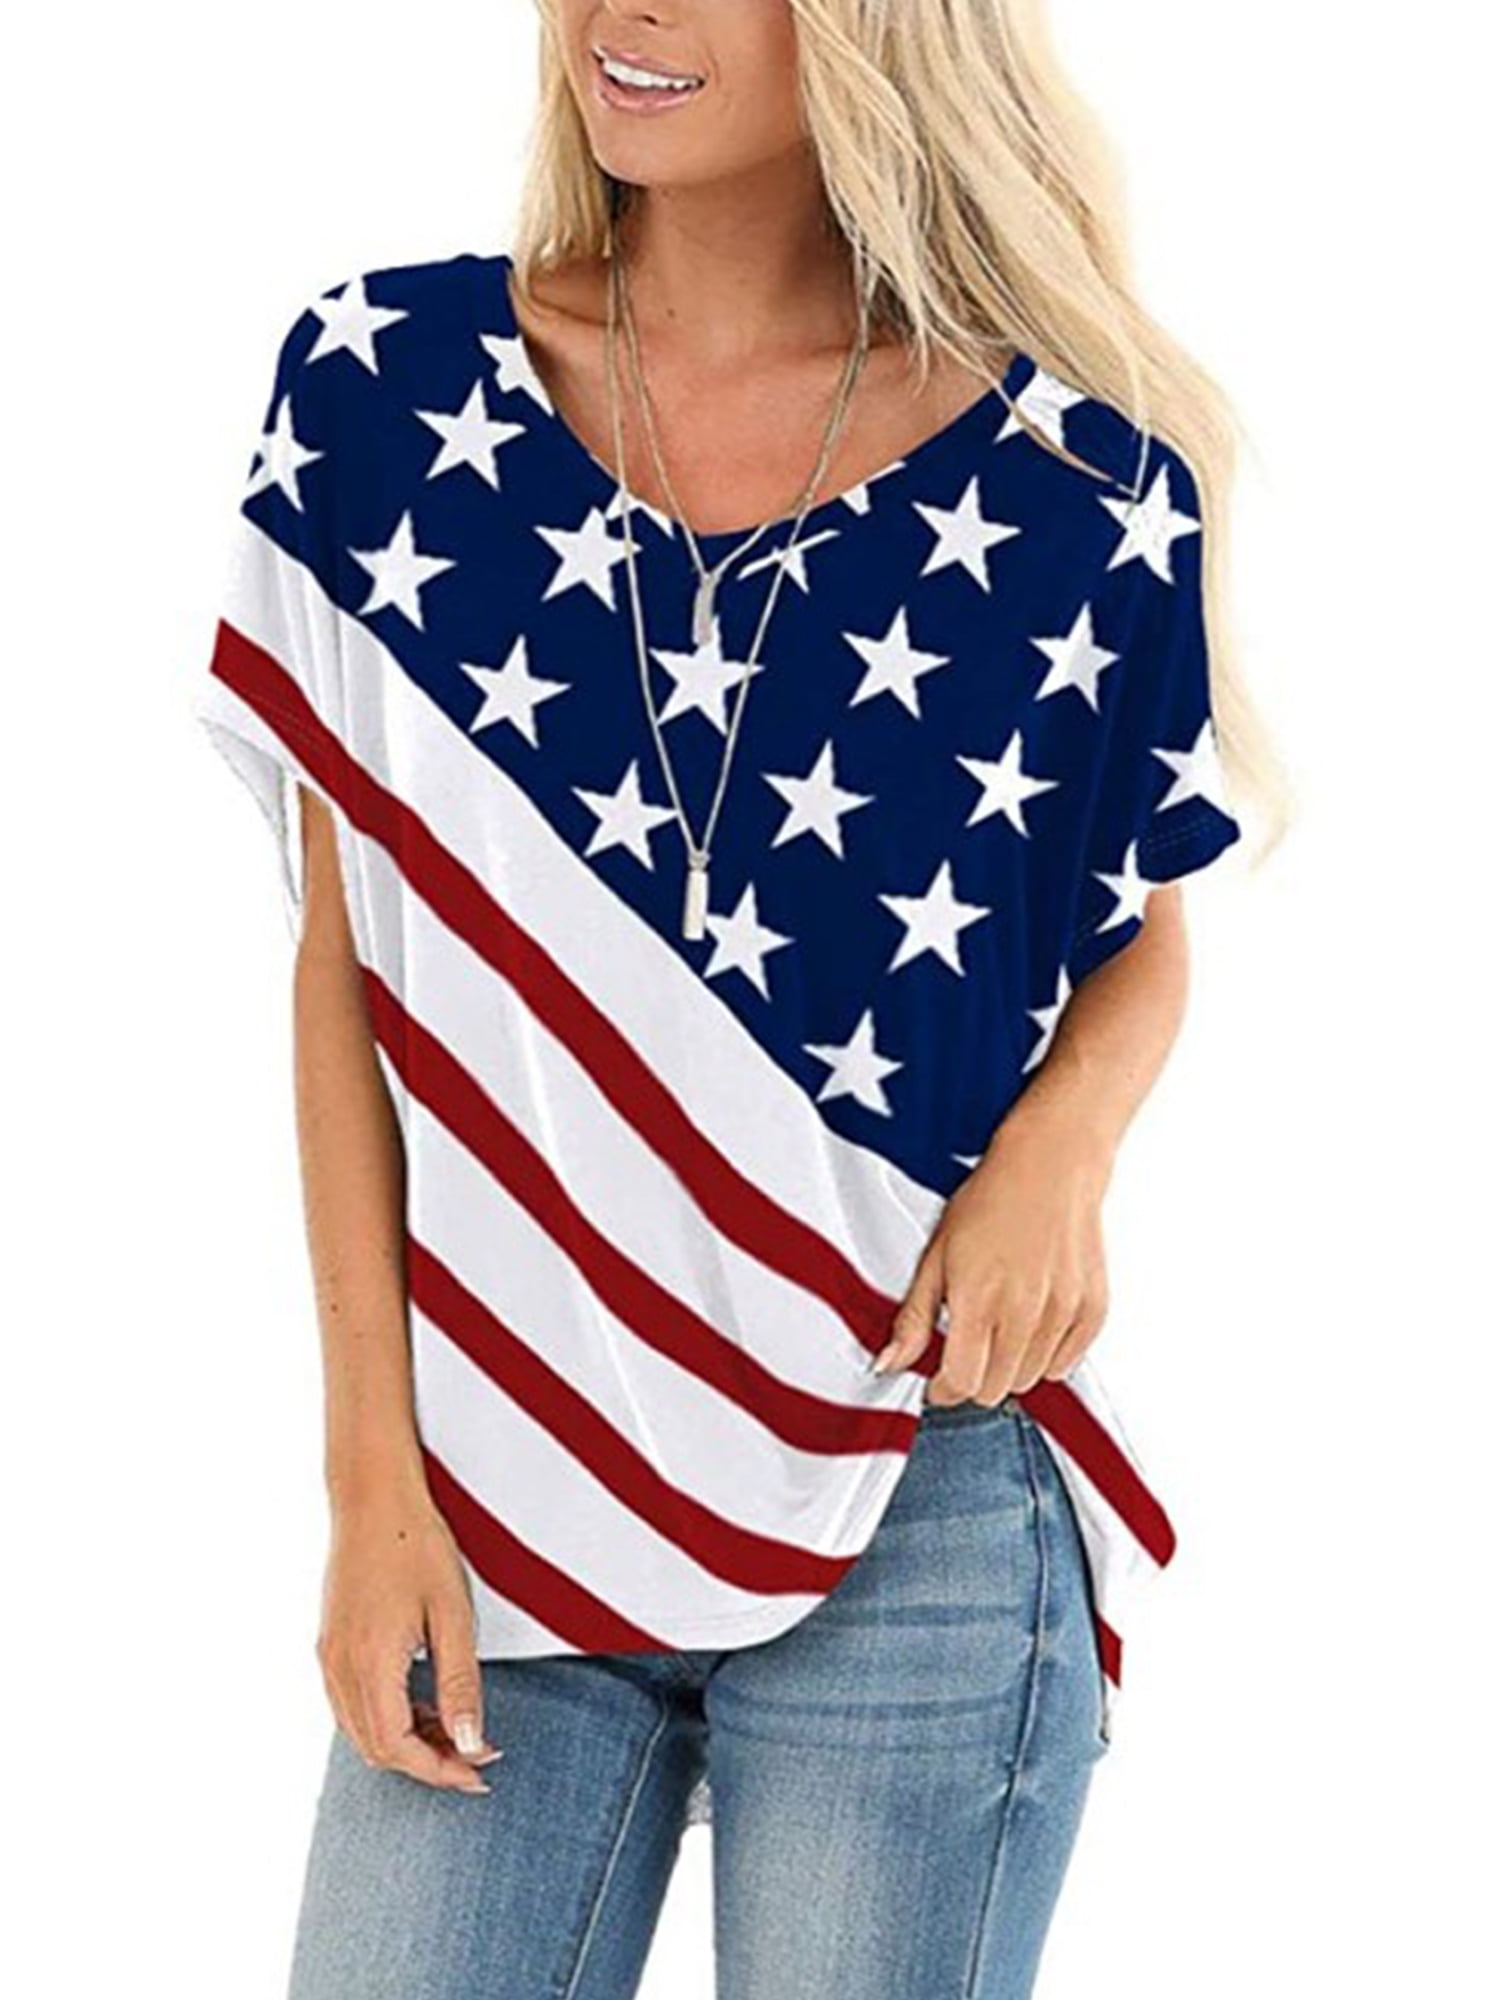 Womens American Flag Tee Shirts Short Sleeve 4th July Patriotic USA Flag Tunic Blouse Top Casual Stars and Striped T Shirt for Women 